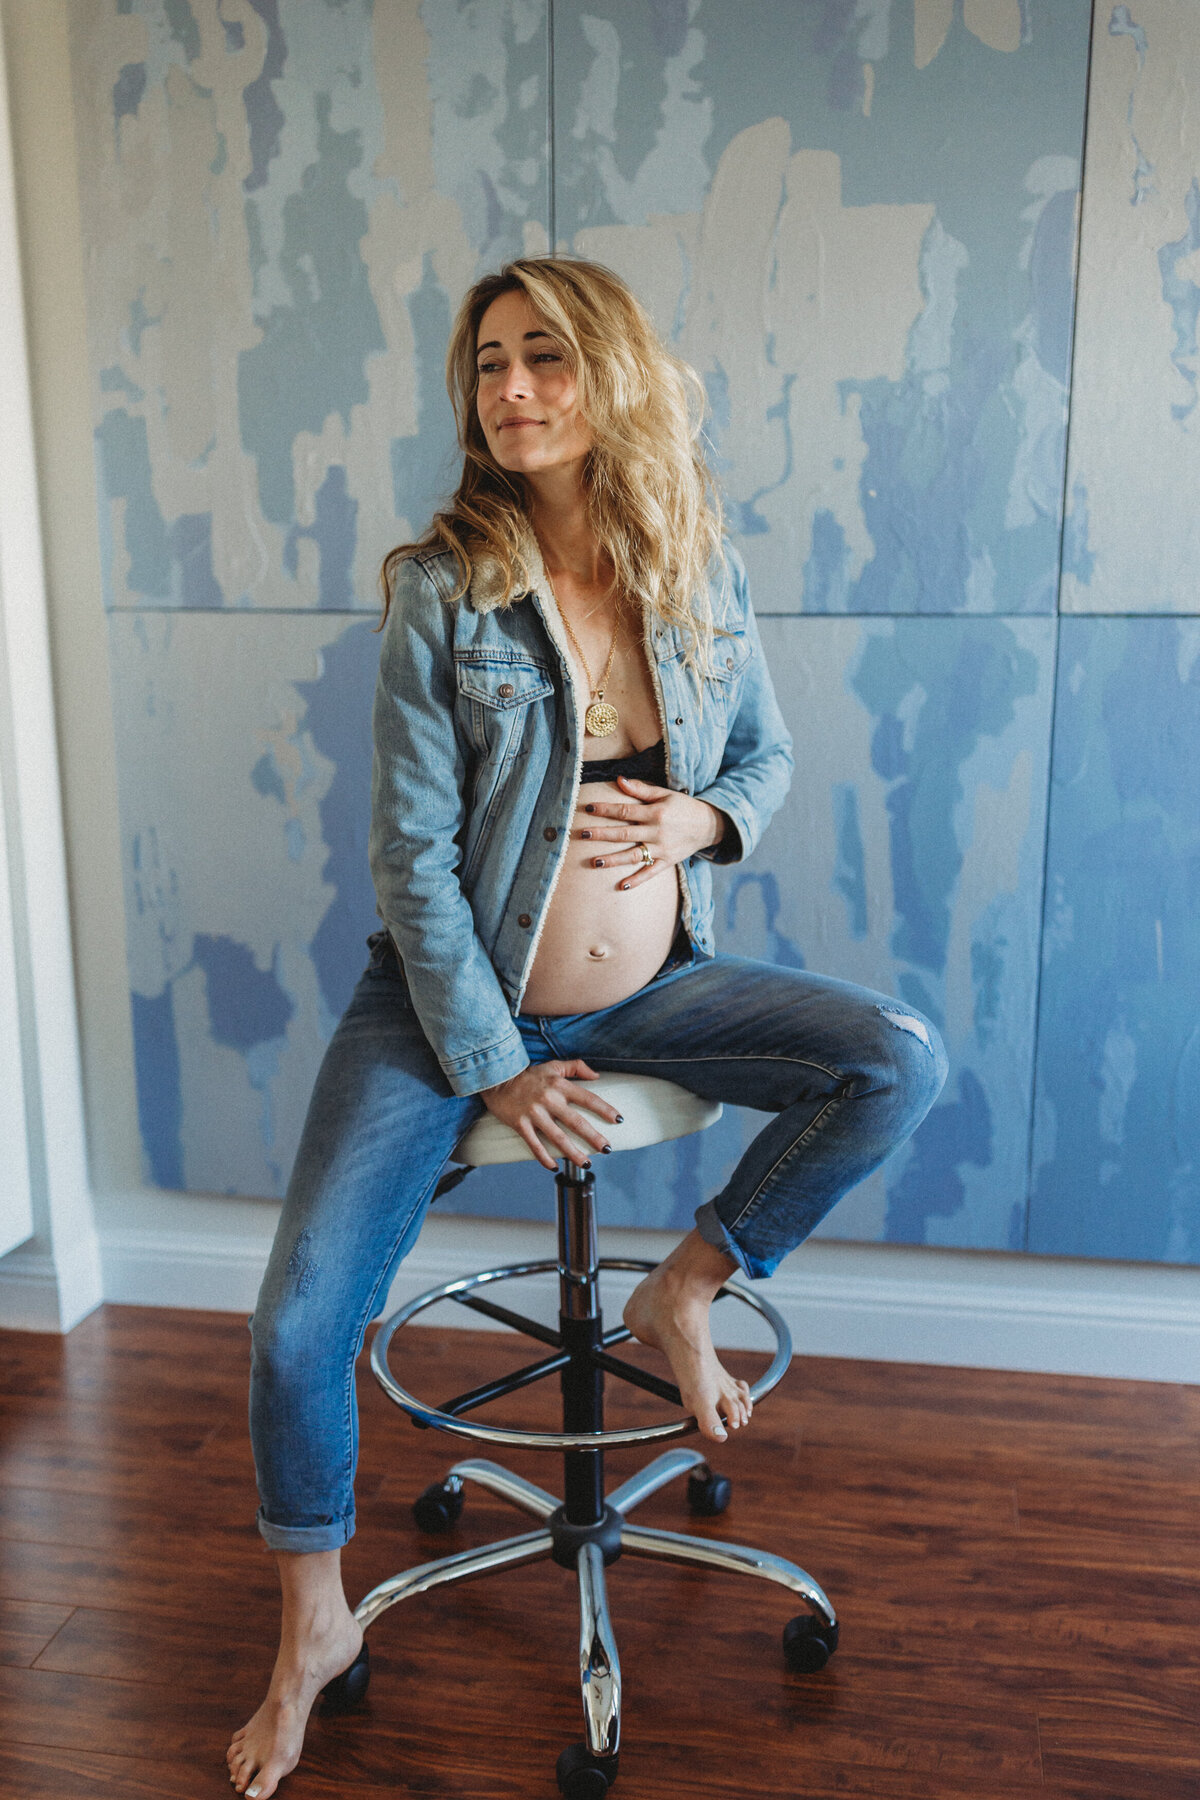 skyler maire photography - in home maternity photos, sausalito maternity photographer, marin county maternity photographer-9431